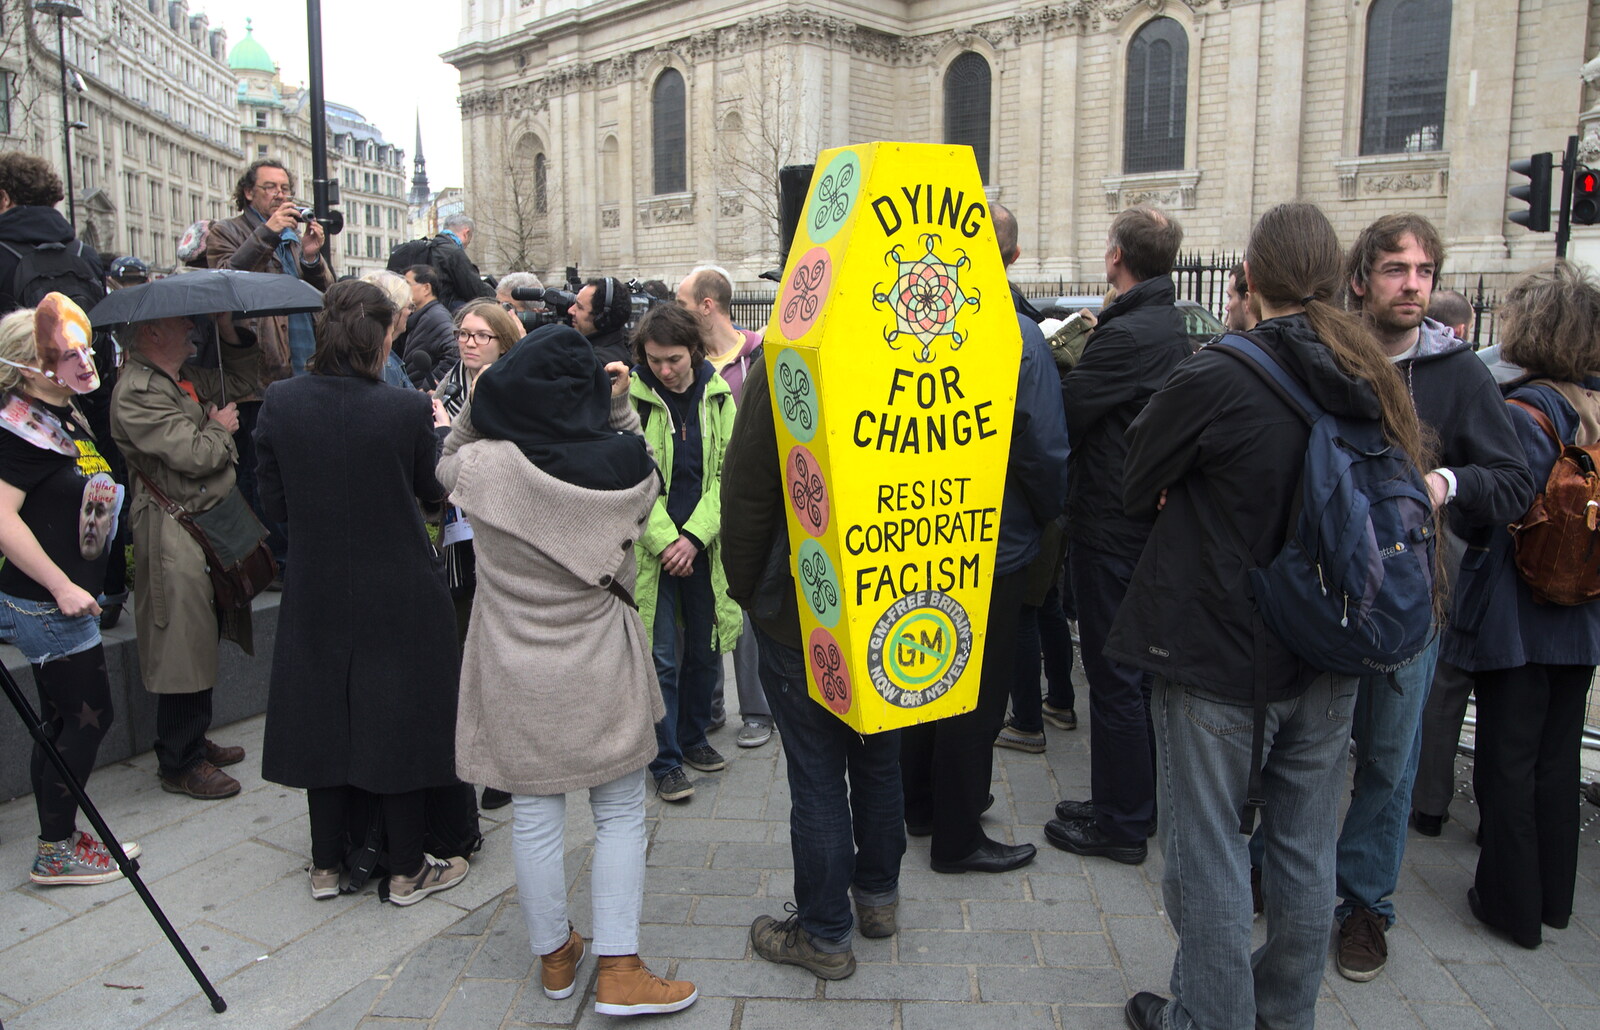 The continuing protest, with a yellow coffin from Margaret Thatcher's Funeral, St. Paul's, London - 17th April 2013